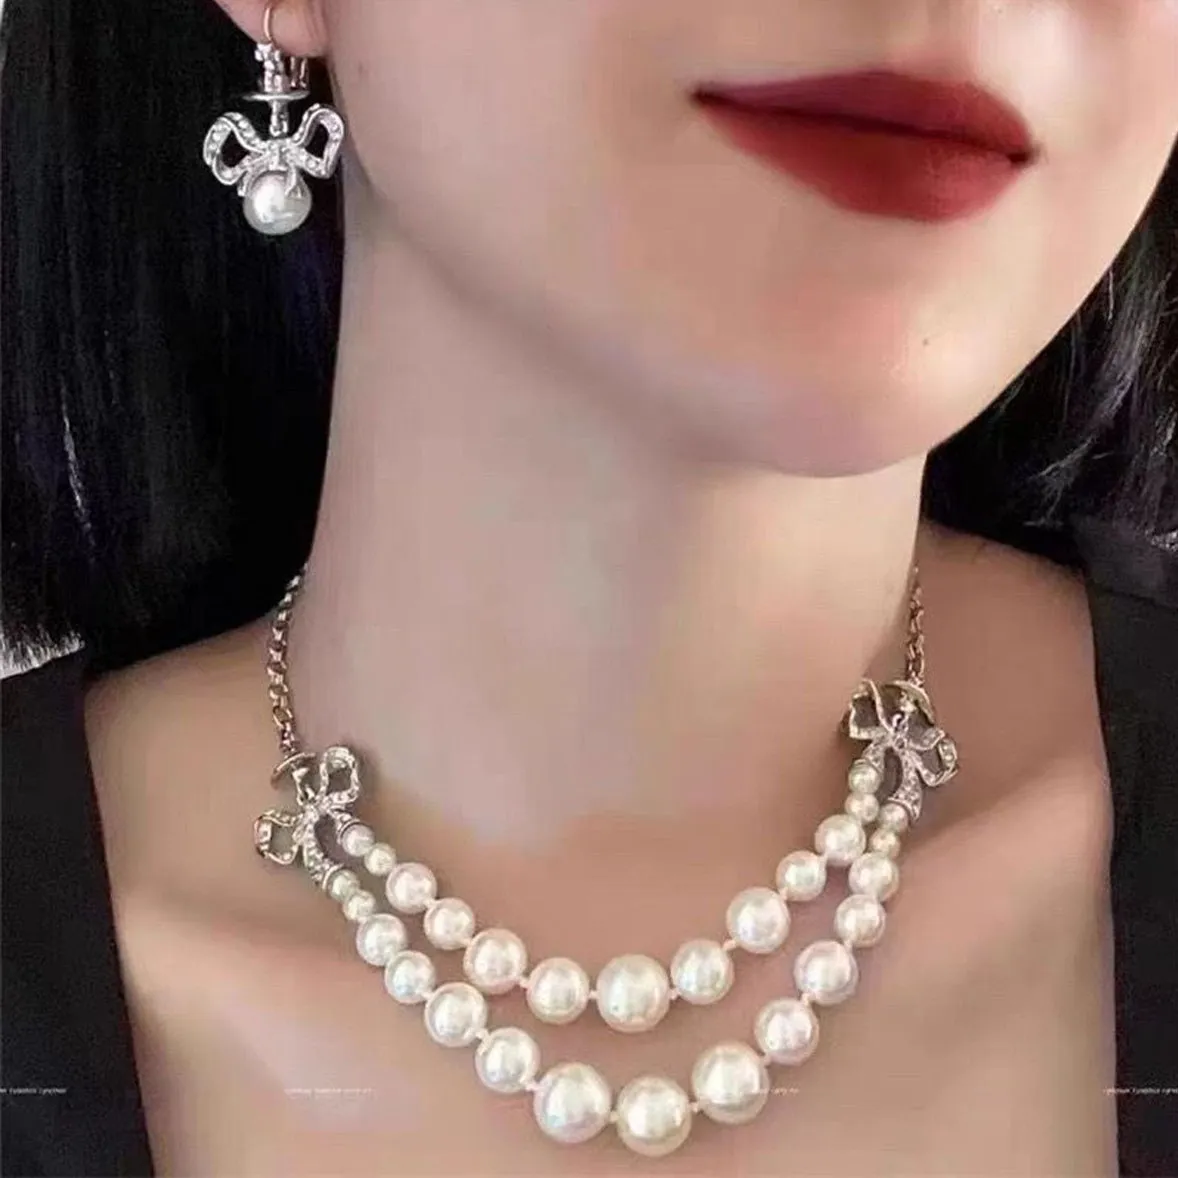 Fashion designer Western Empress Dowager's planet Necklace Layers of Pearl Full Diamond Saturn Collar Chain for women Stainless steel Jewelry gift